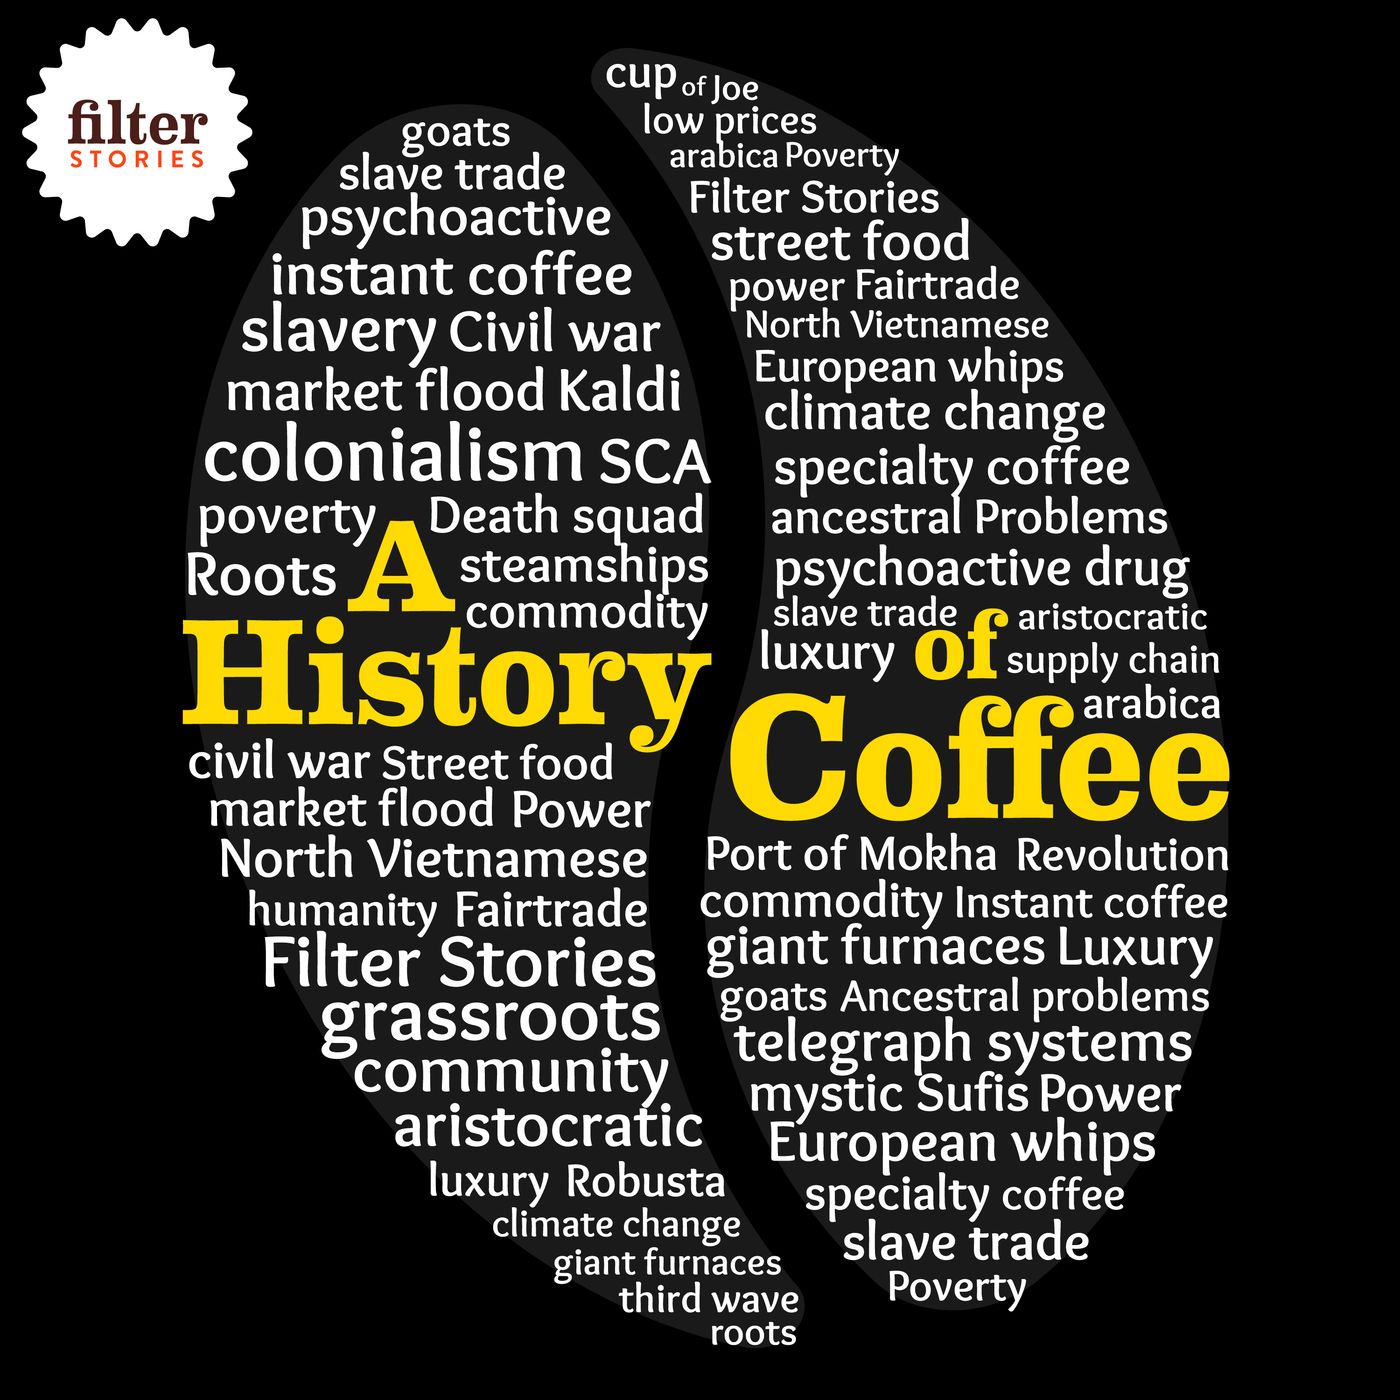 A History of Coffee podcast show image